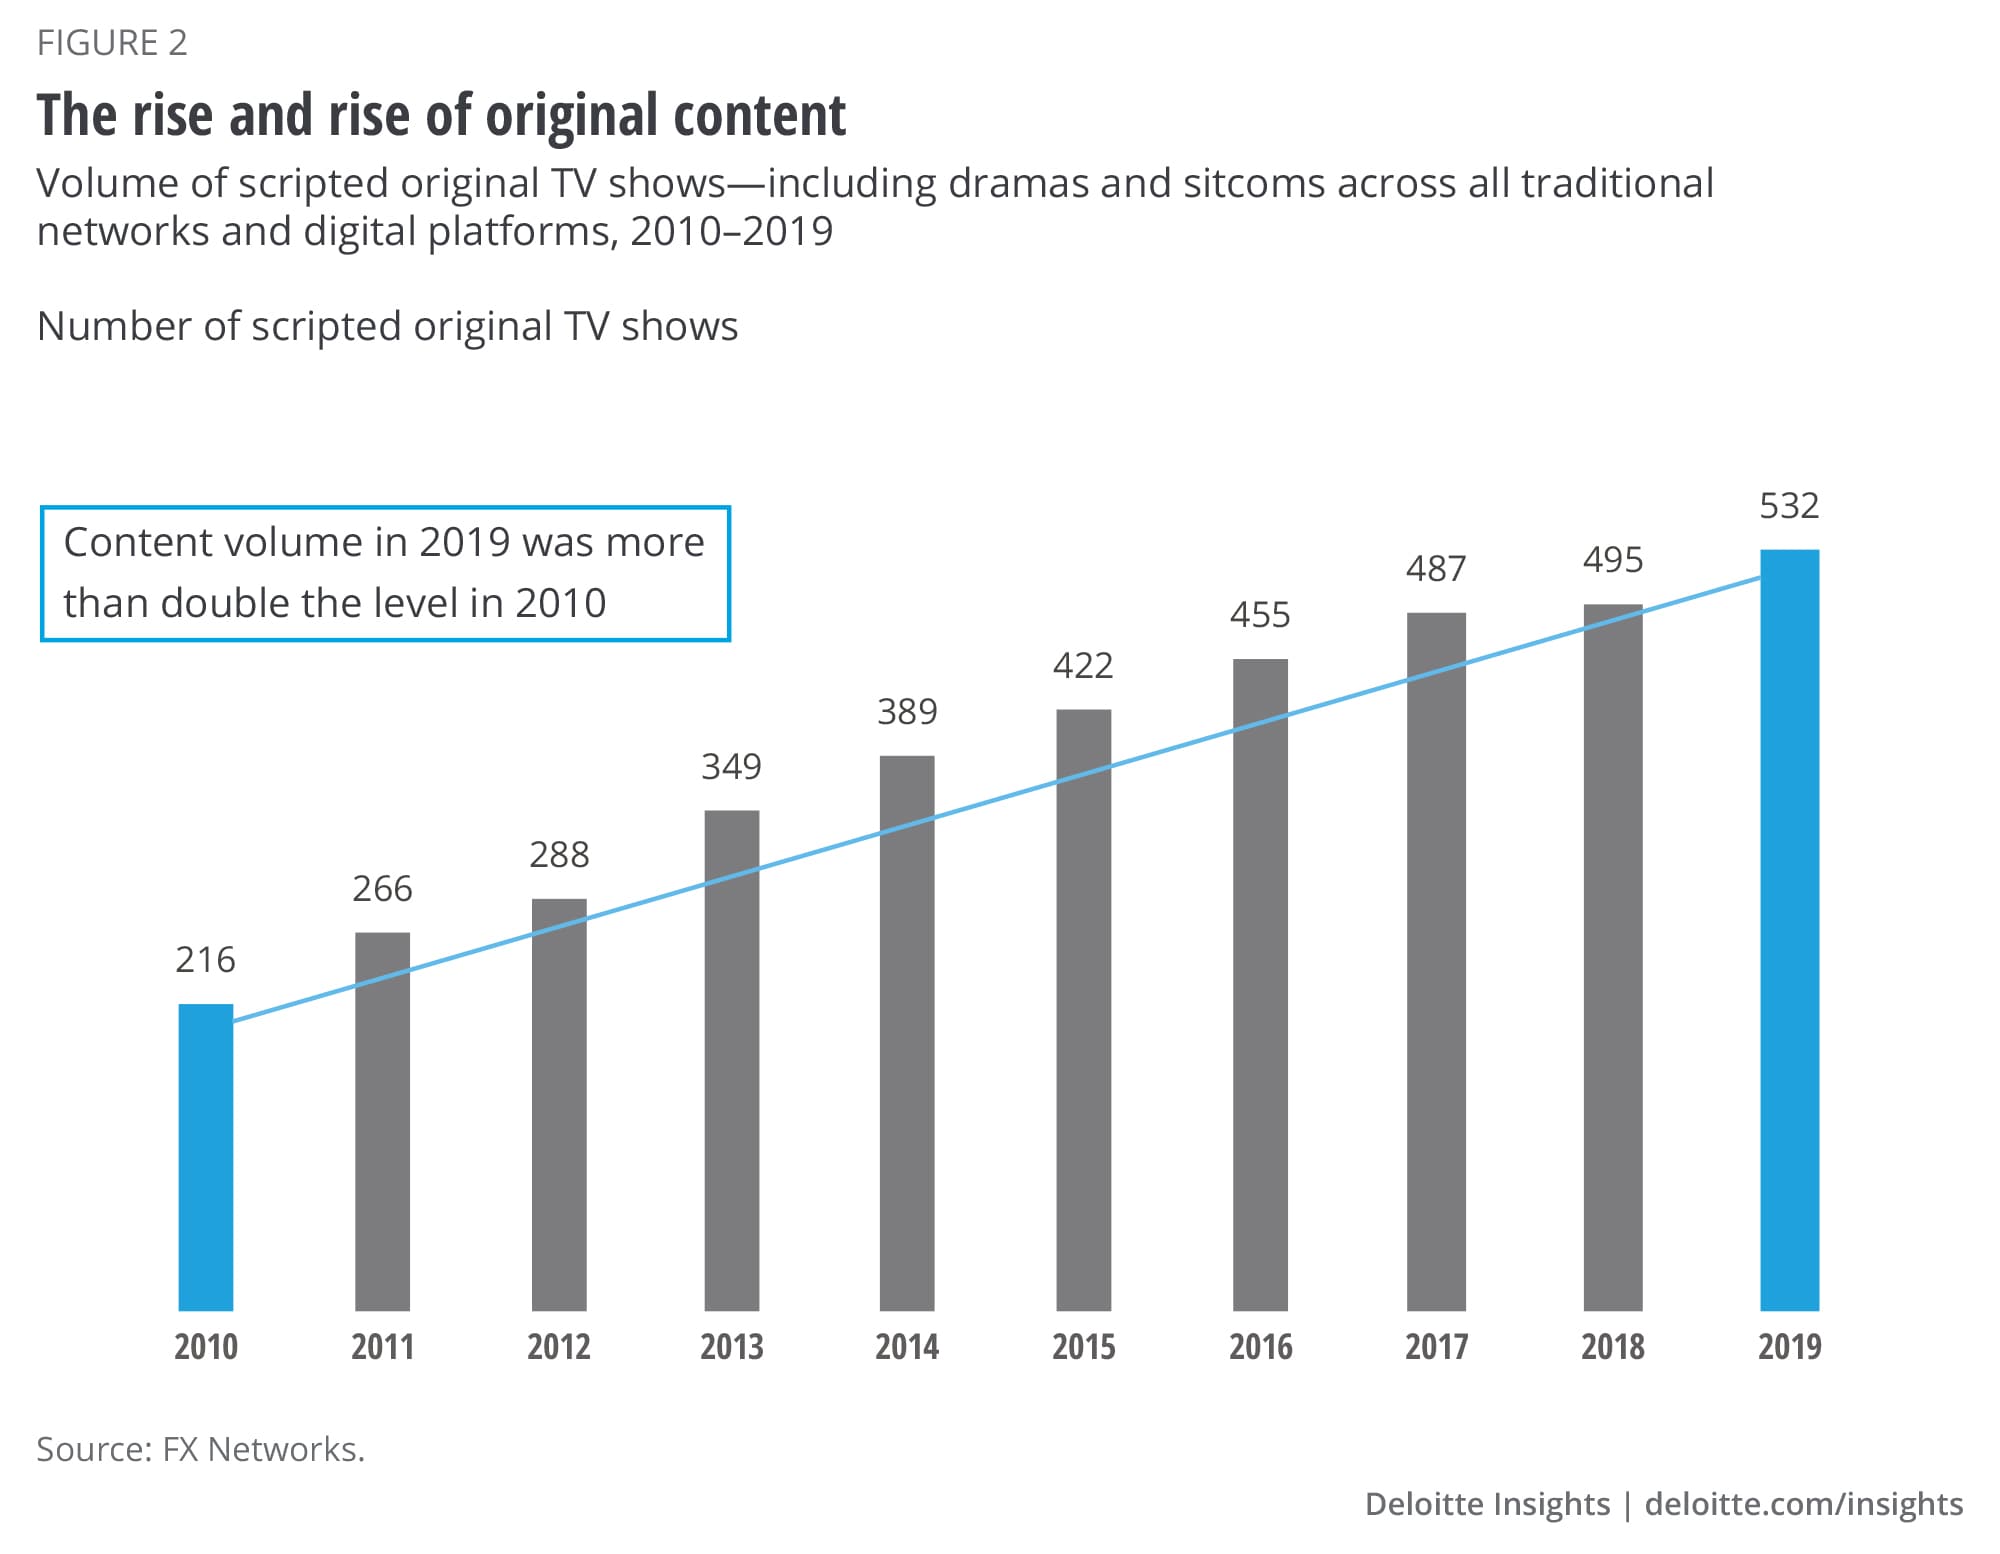 The rise and rise of original content